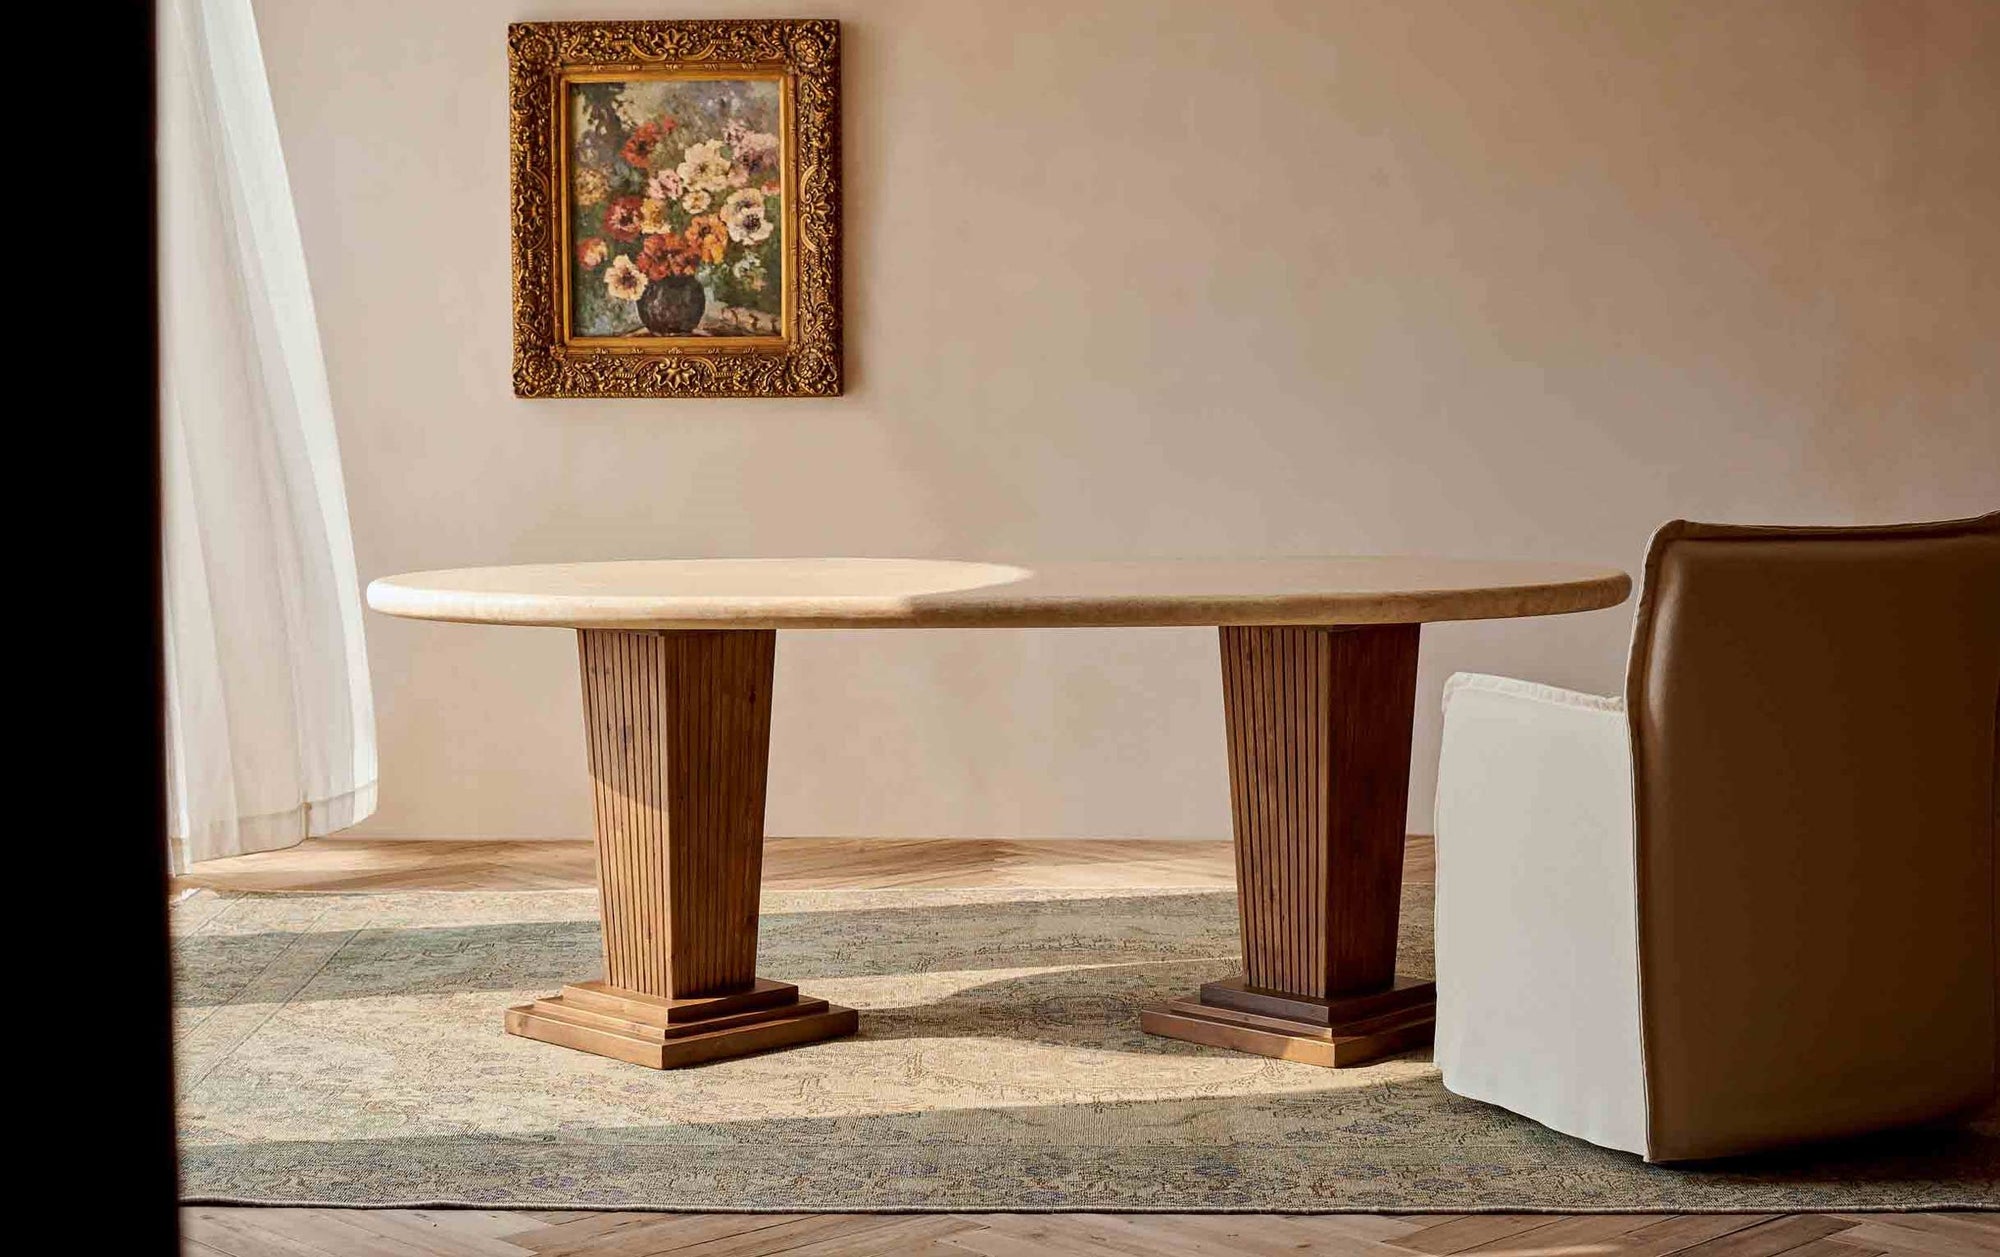 Cordelia Dining Table in Galata Travertine and Heritage Pine placed next to a Neva Dining Chair